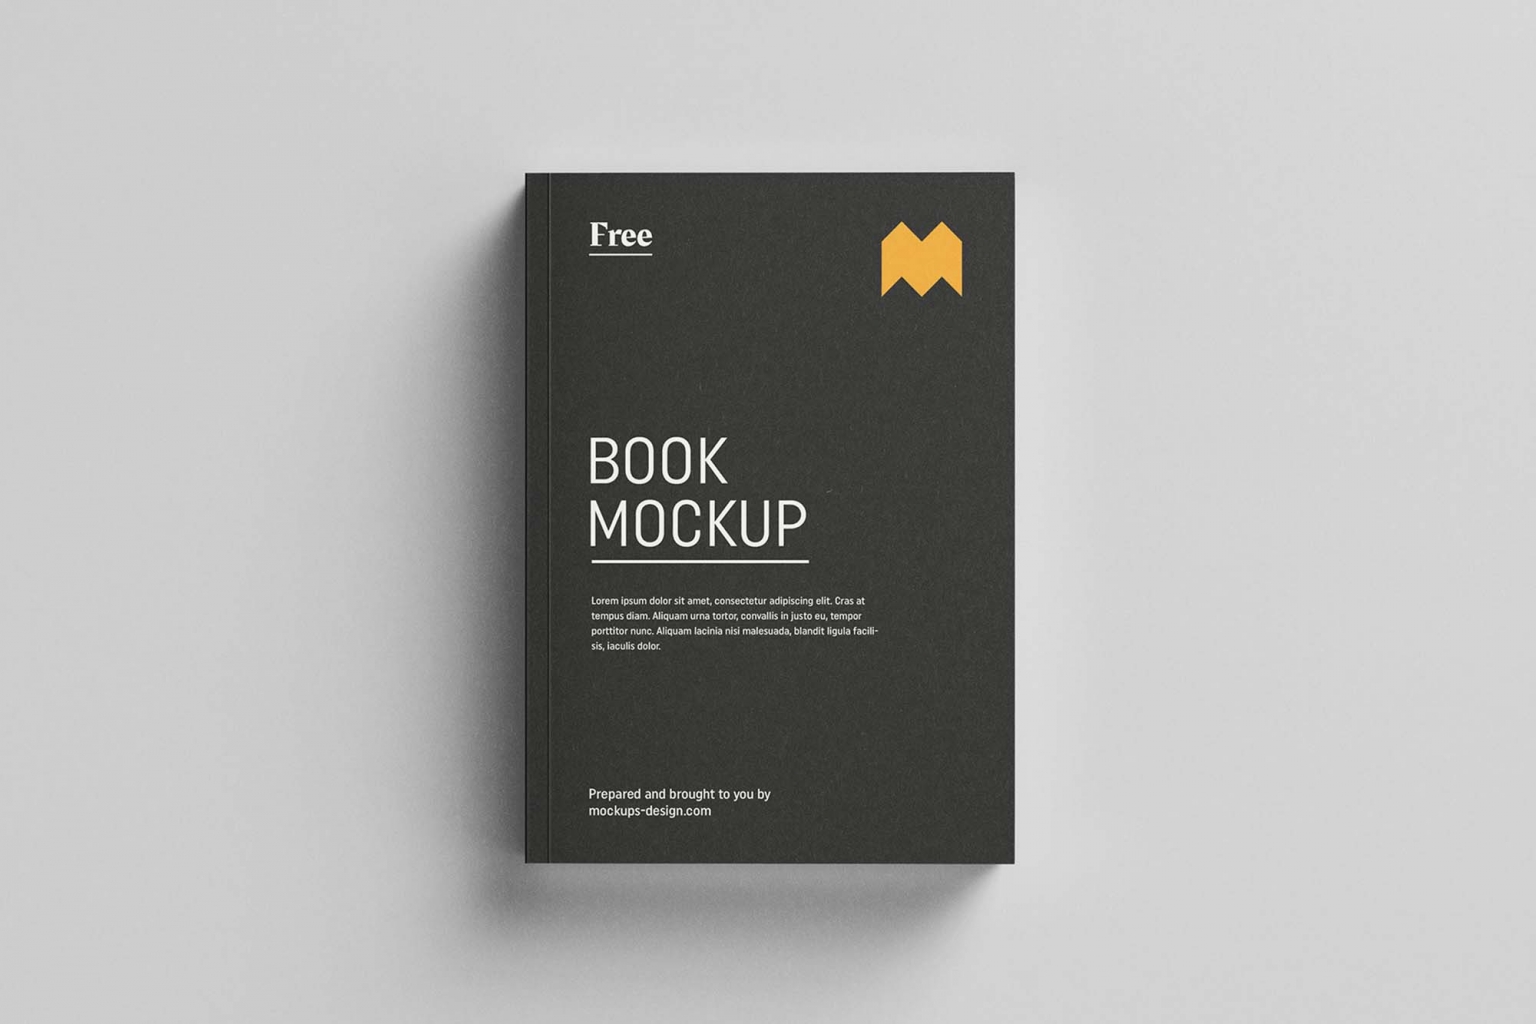 A sleek black softcover book mockup with the title "book mockup" in bold white letters and a small, orange crown-like logo at the top right corner, laid on a plain white background